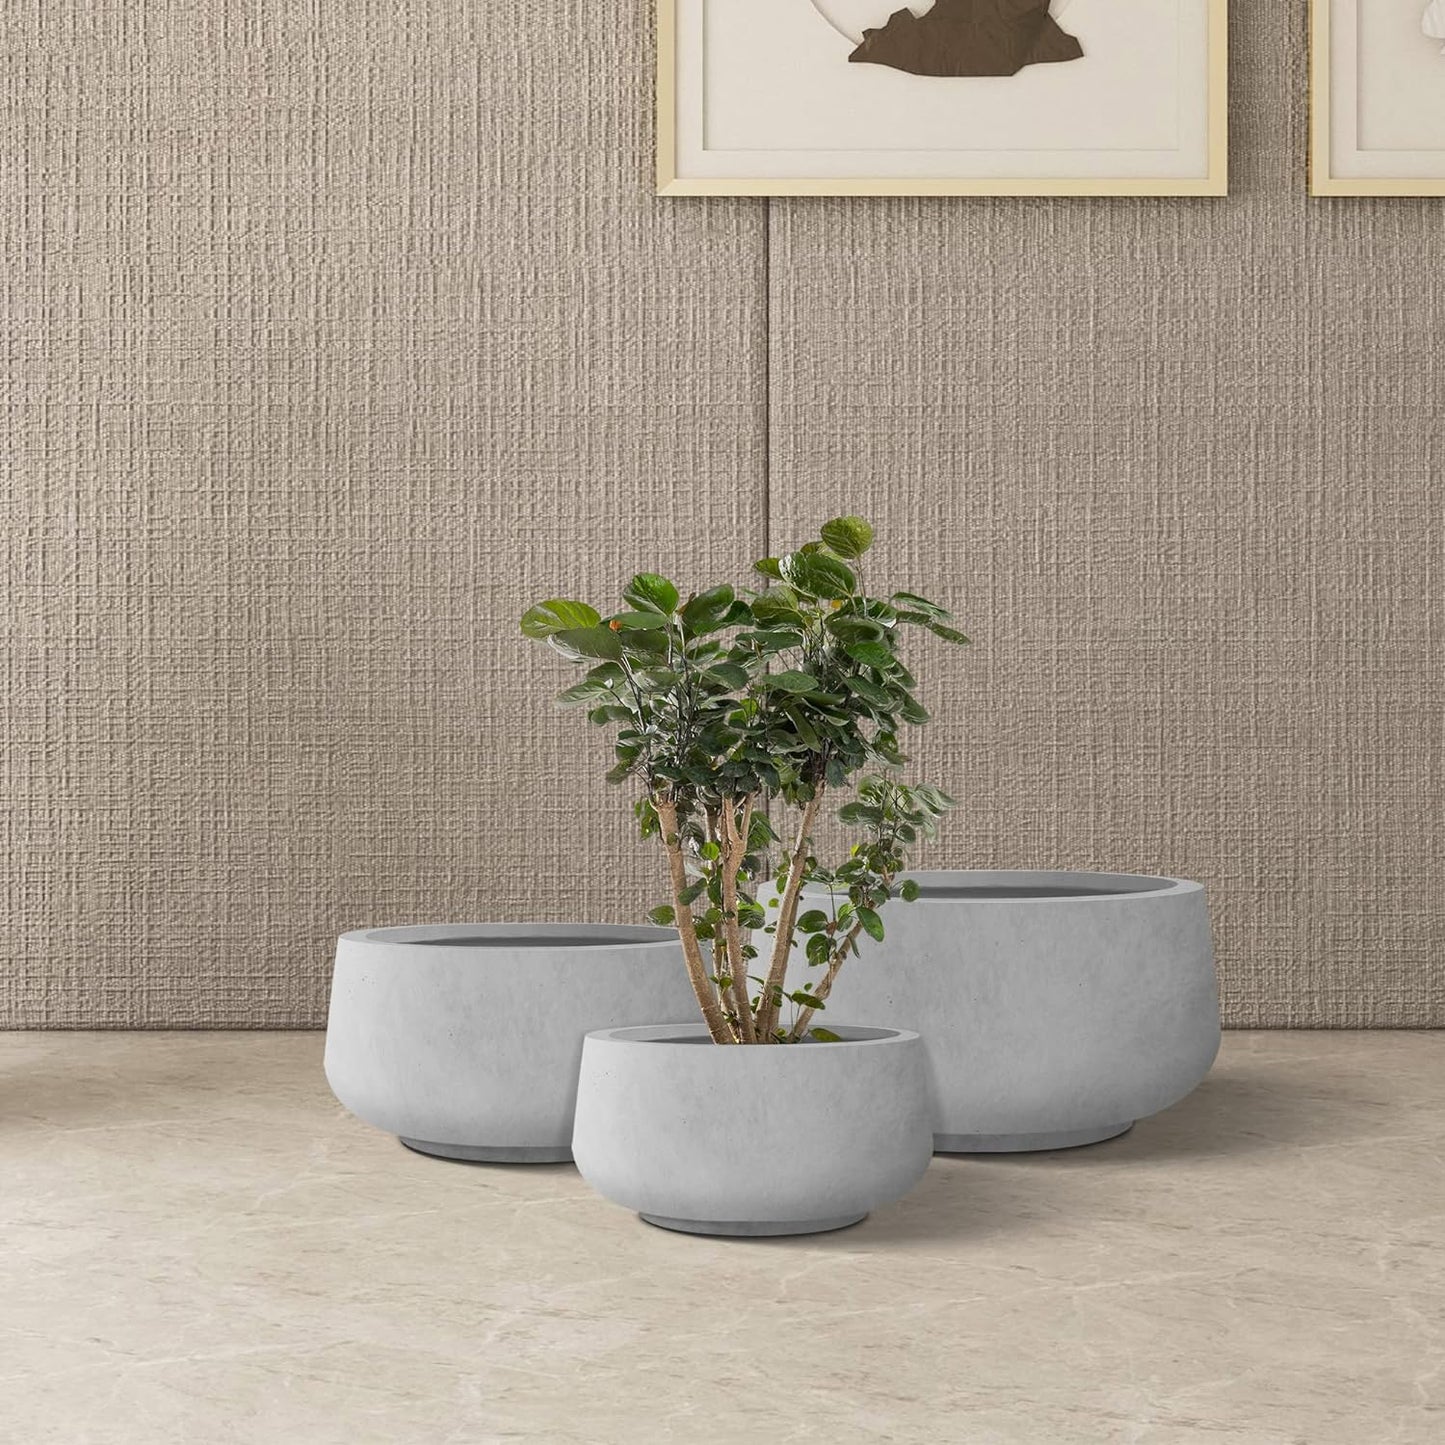 Kante 21.6",16.9",and 12.5" Dia Round Weathered Concrete Elegant Planters (Set of 3), Outdoor Indoor Garden Plant Pot with Drainage Hole and Rubber Plug for Home & Patio